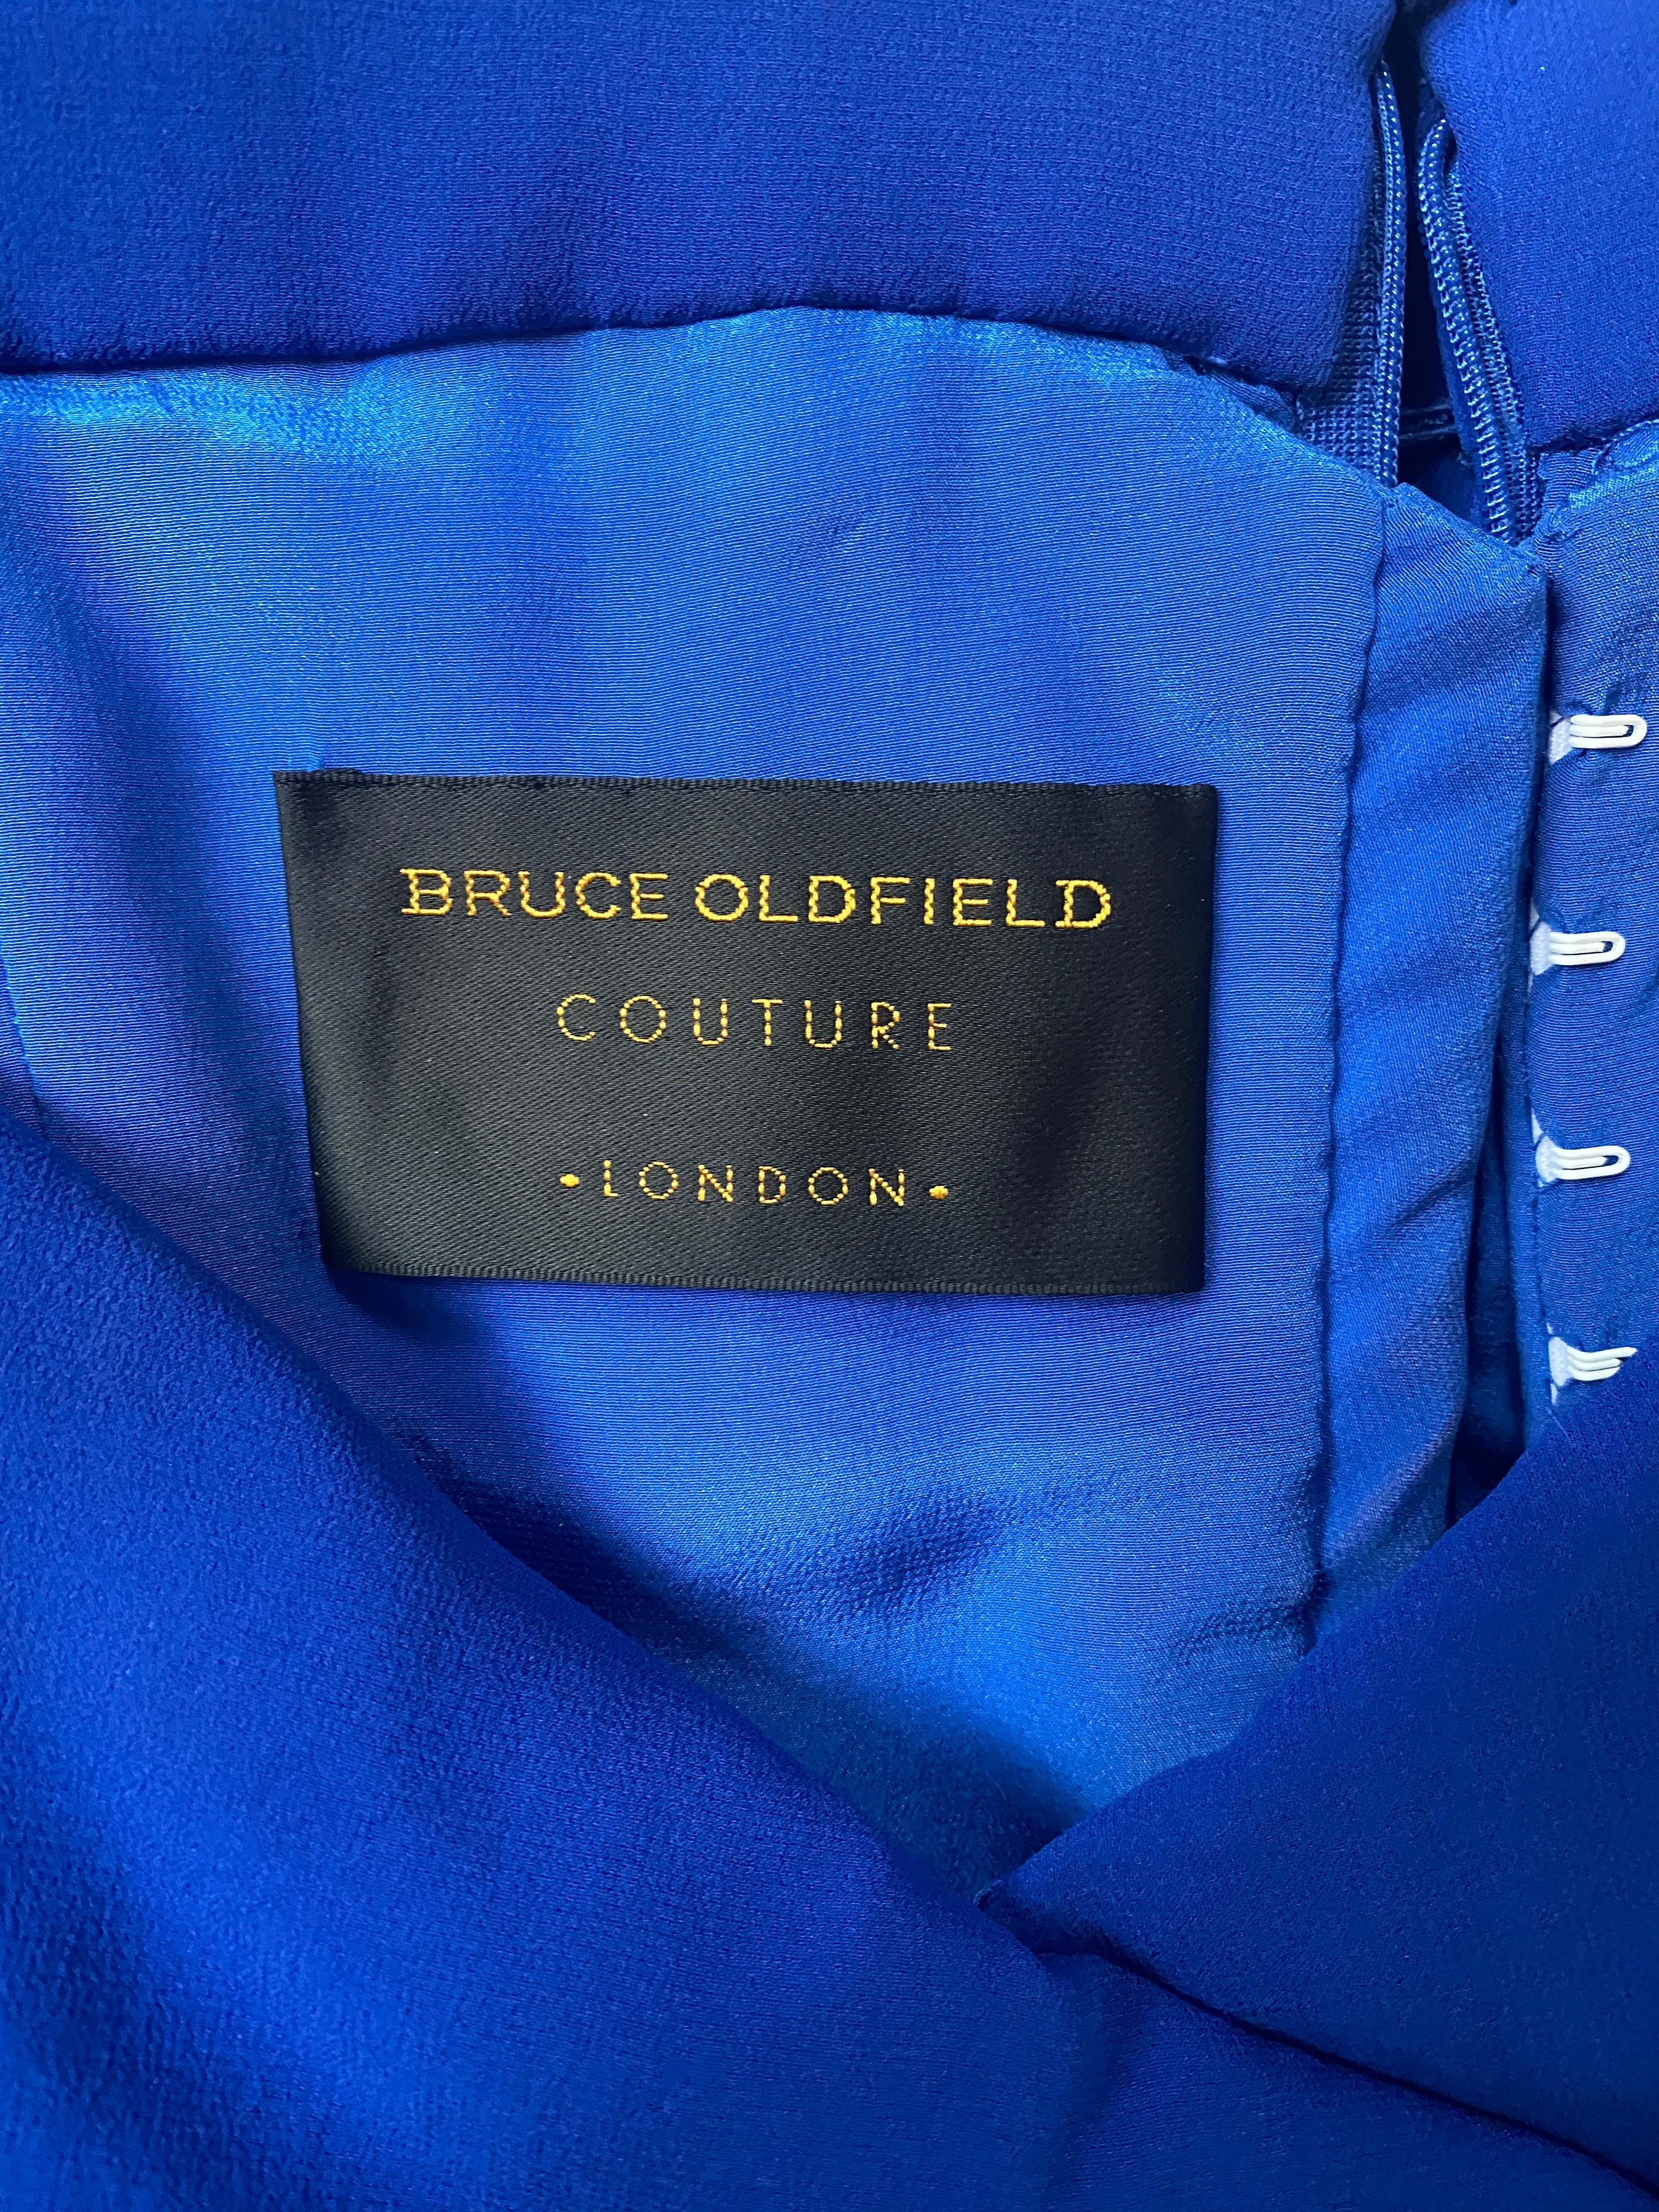 Bruce Oldfield Royal Blue Couture Dress For Sale 3